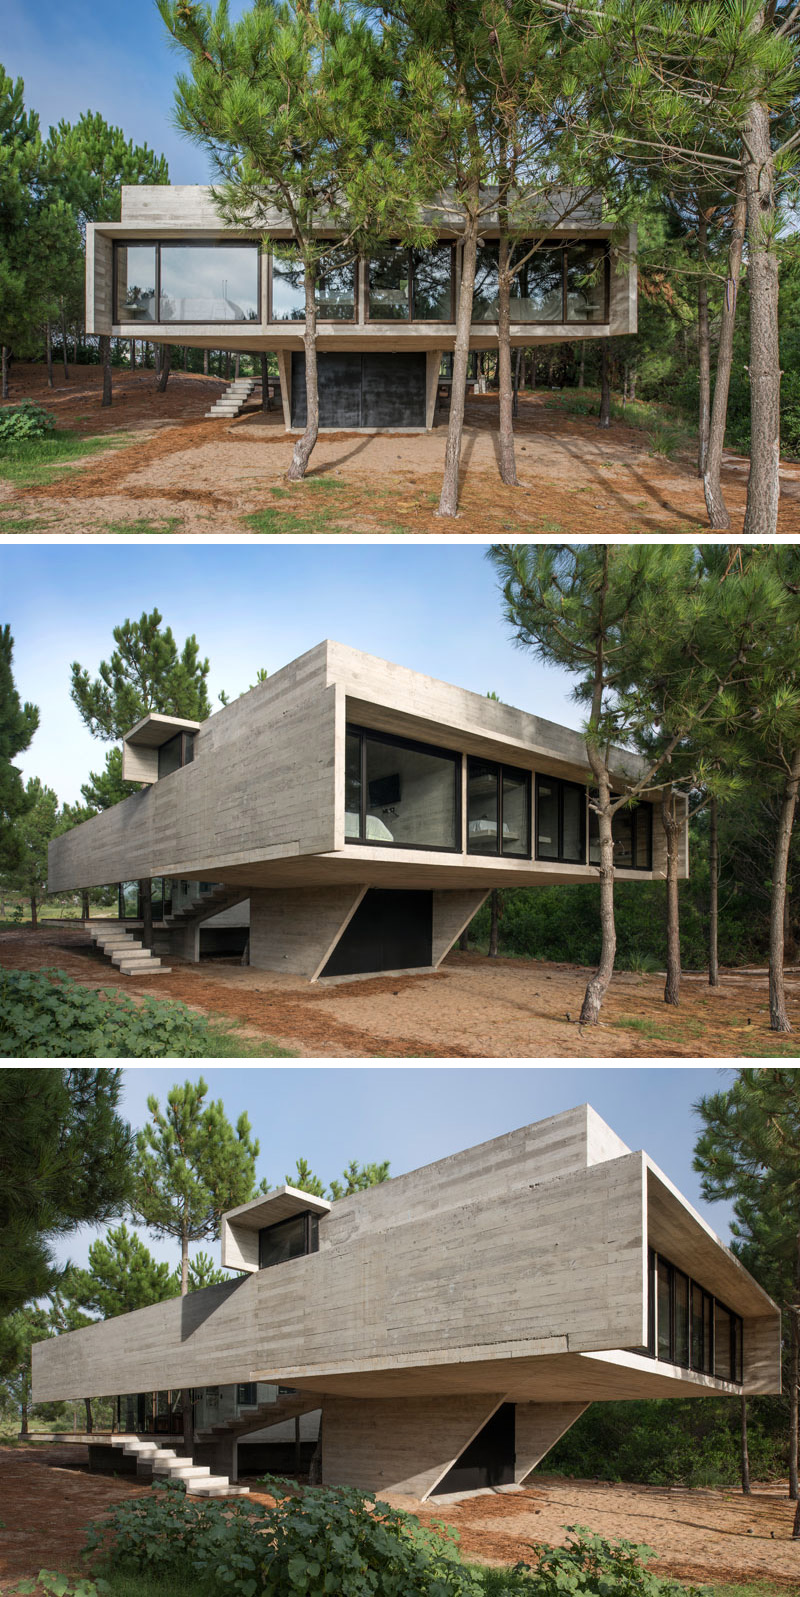 This modern house is made almost entirely from board formed concrete, creating lines of texture on the concrete resembling wood. Minimalist in design, the house is tucked neatly behind the trees.